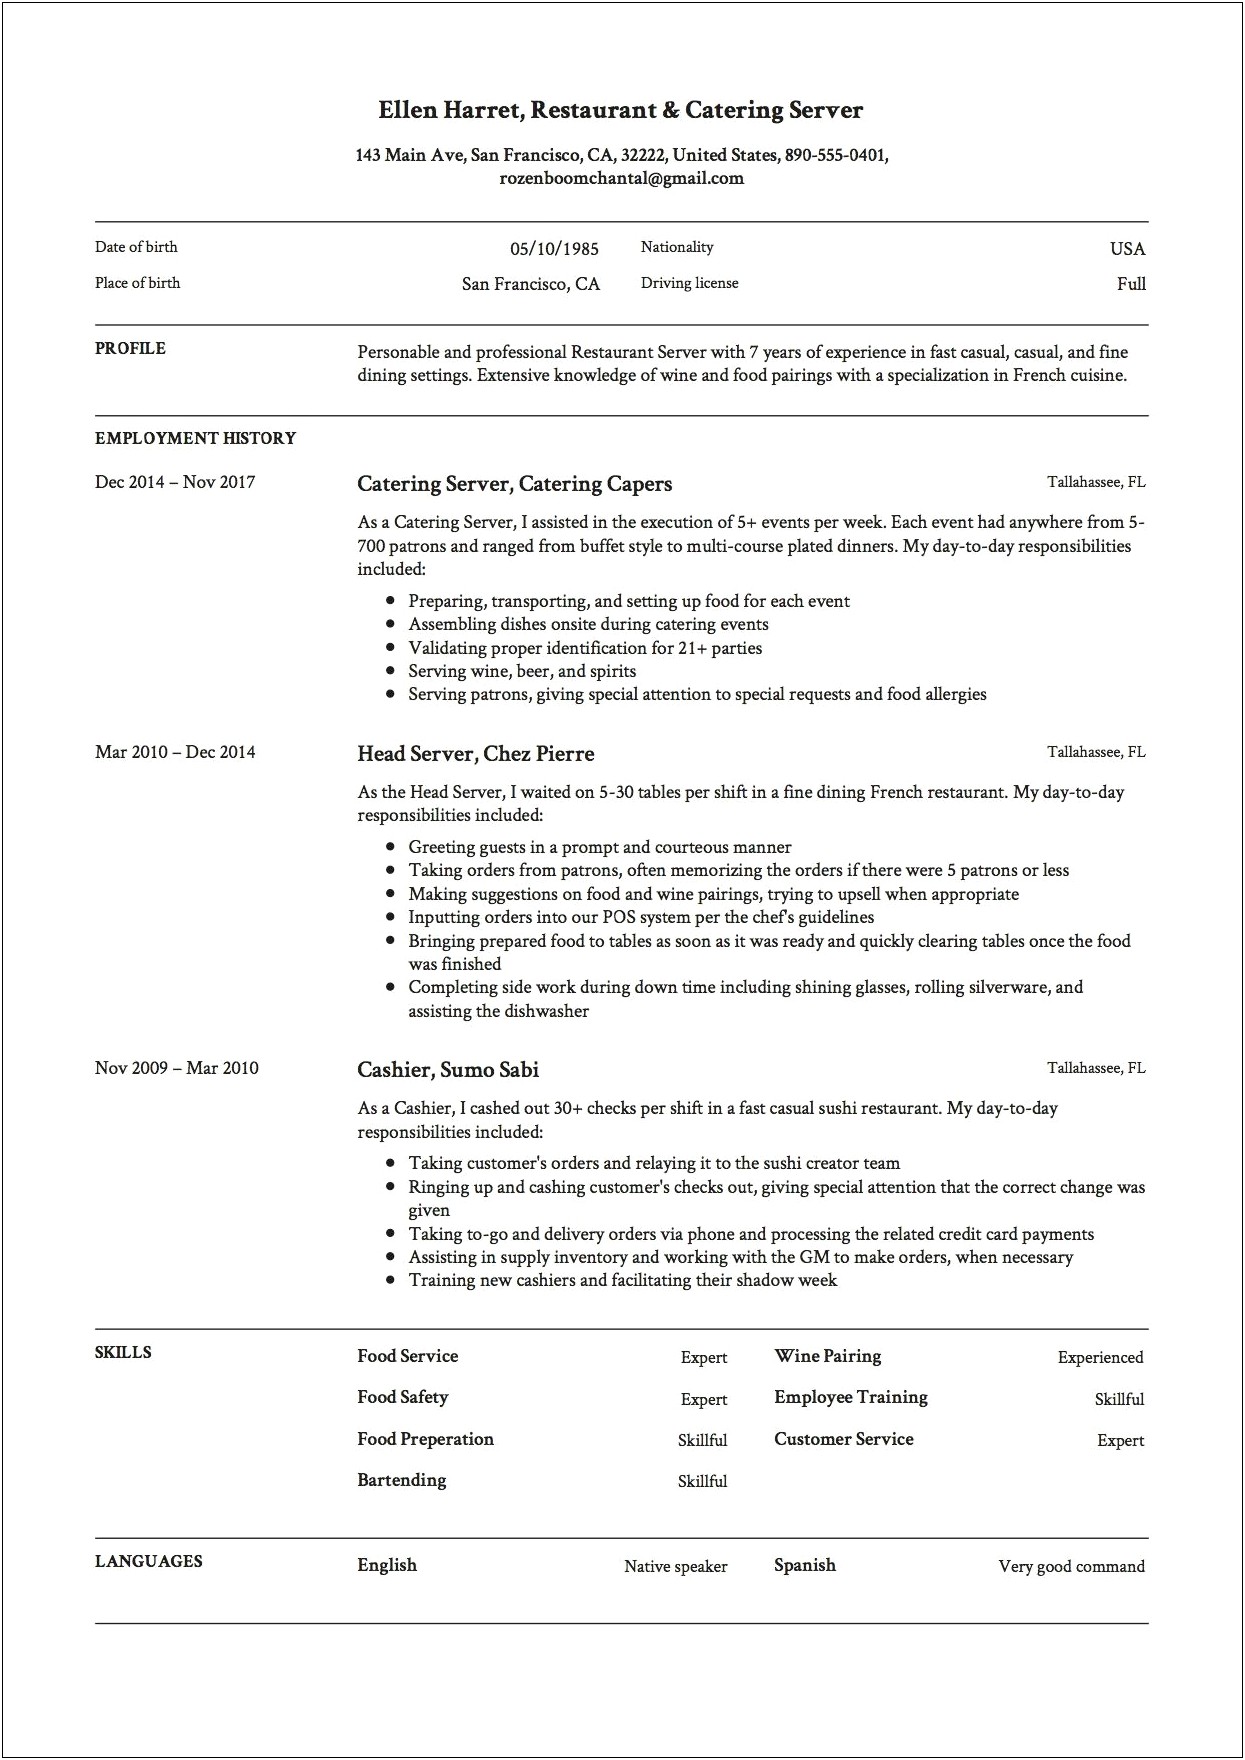 Using Server Experience On Resume In New Job